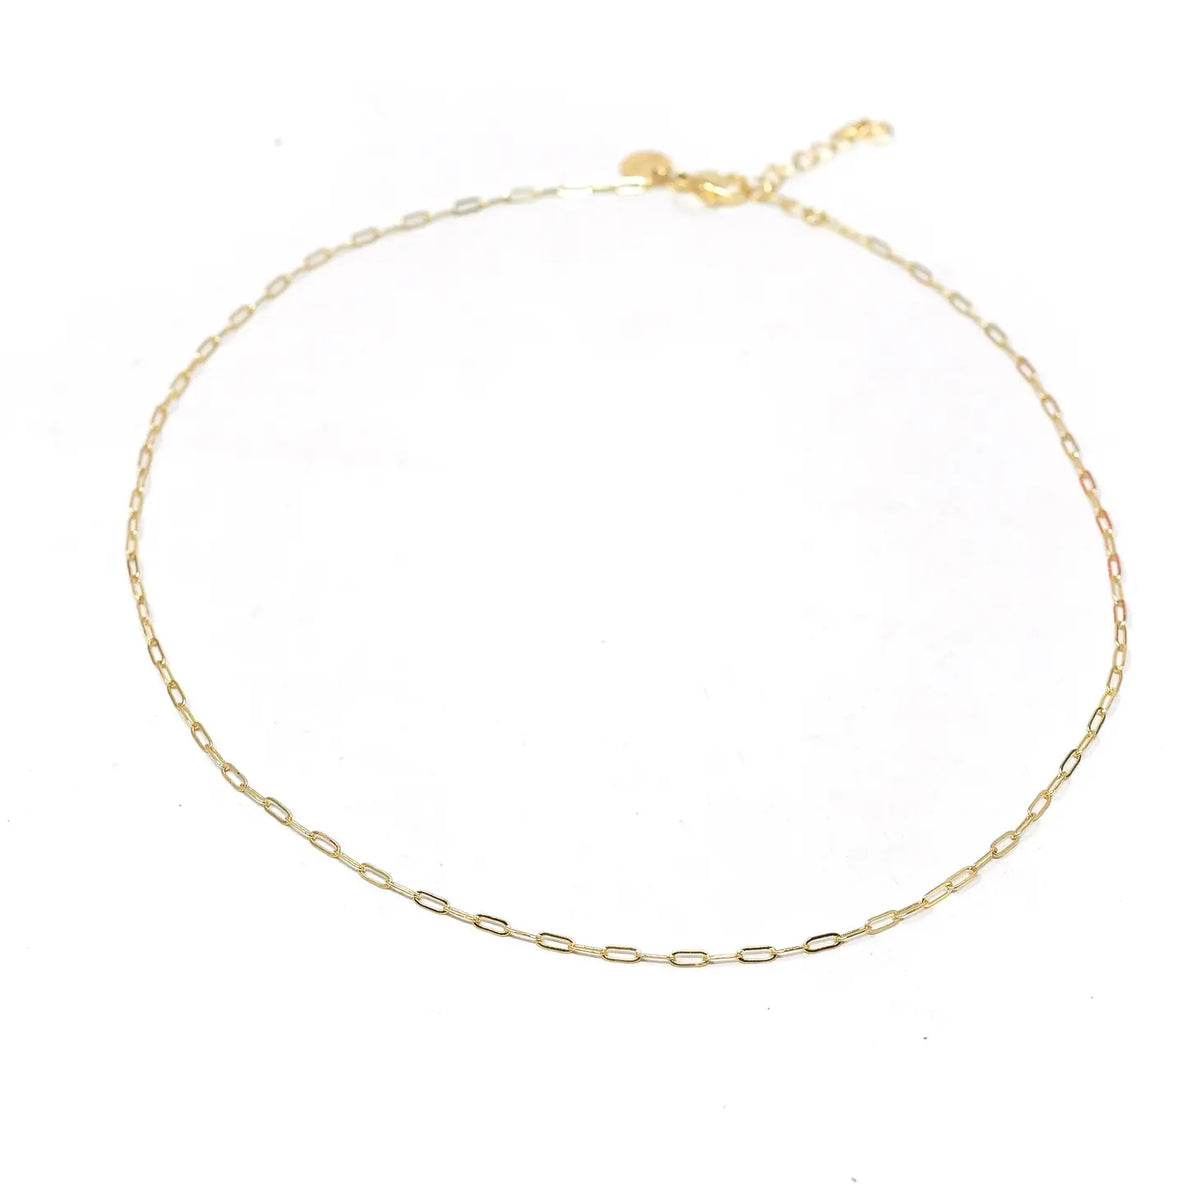 Mini Paperclip Chain Necklace-The perfect mini paperclip necklace! The mini paperclip style is adorable paired by itself as a great classic chain or paired with your favorite charm or initial charm.

-Cali Moon Boutique, Plainville Connecticut